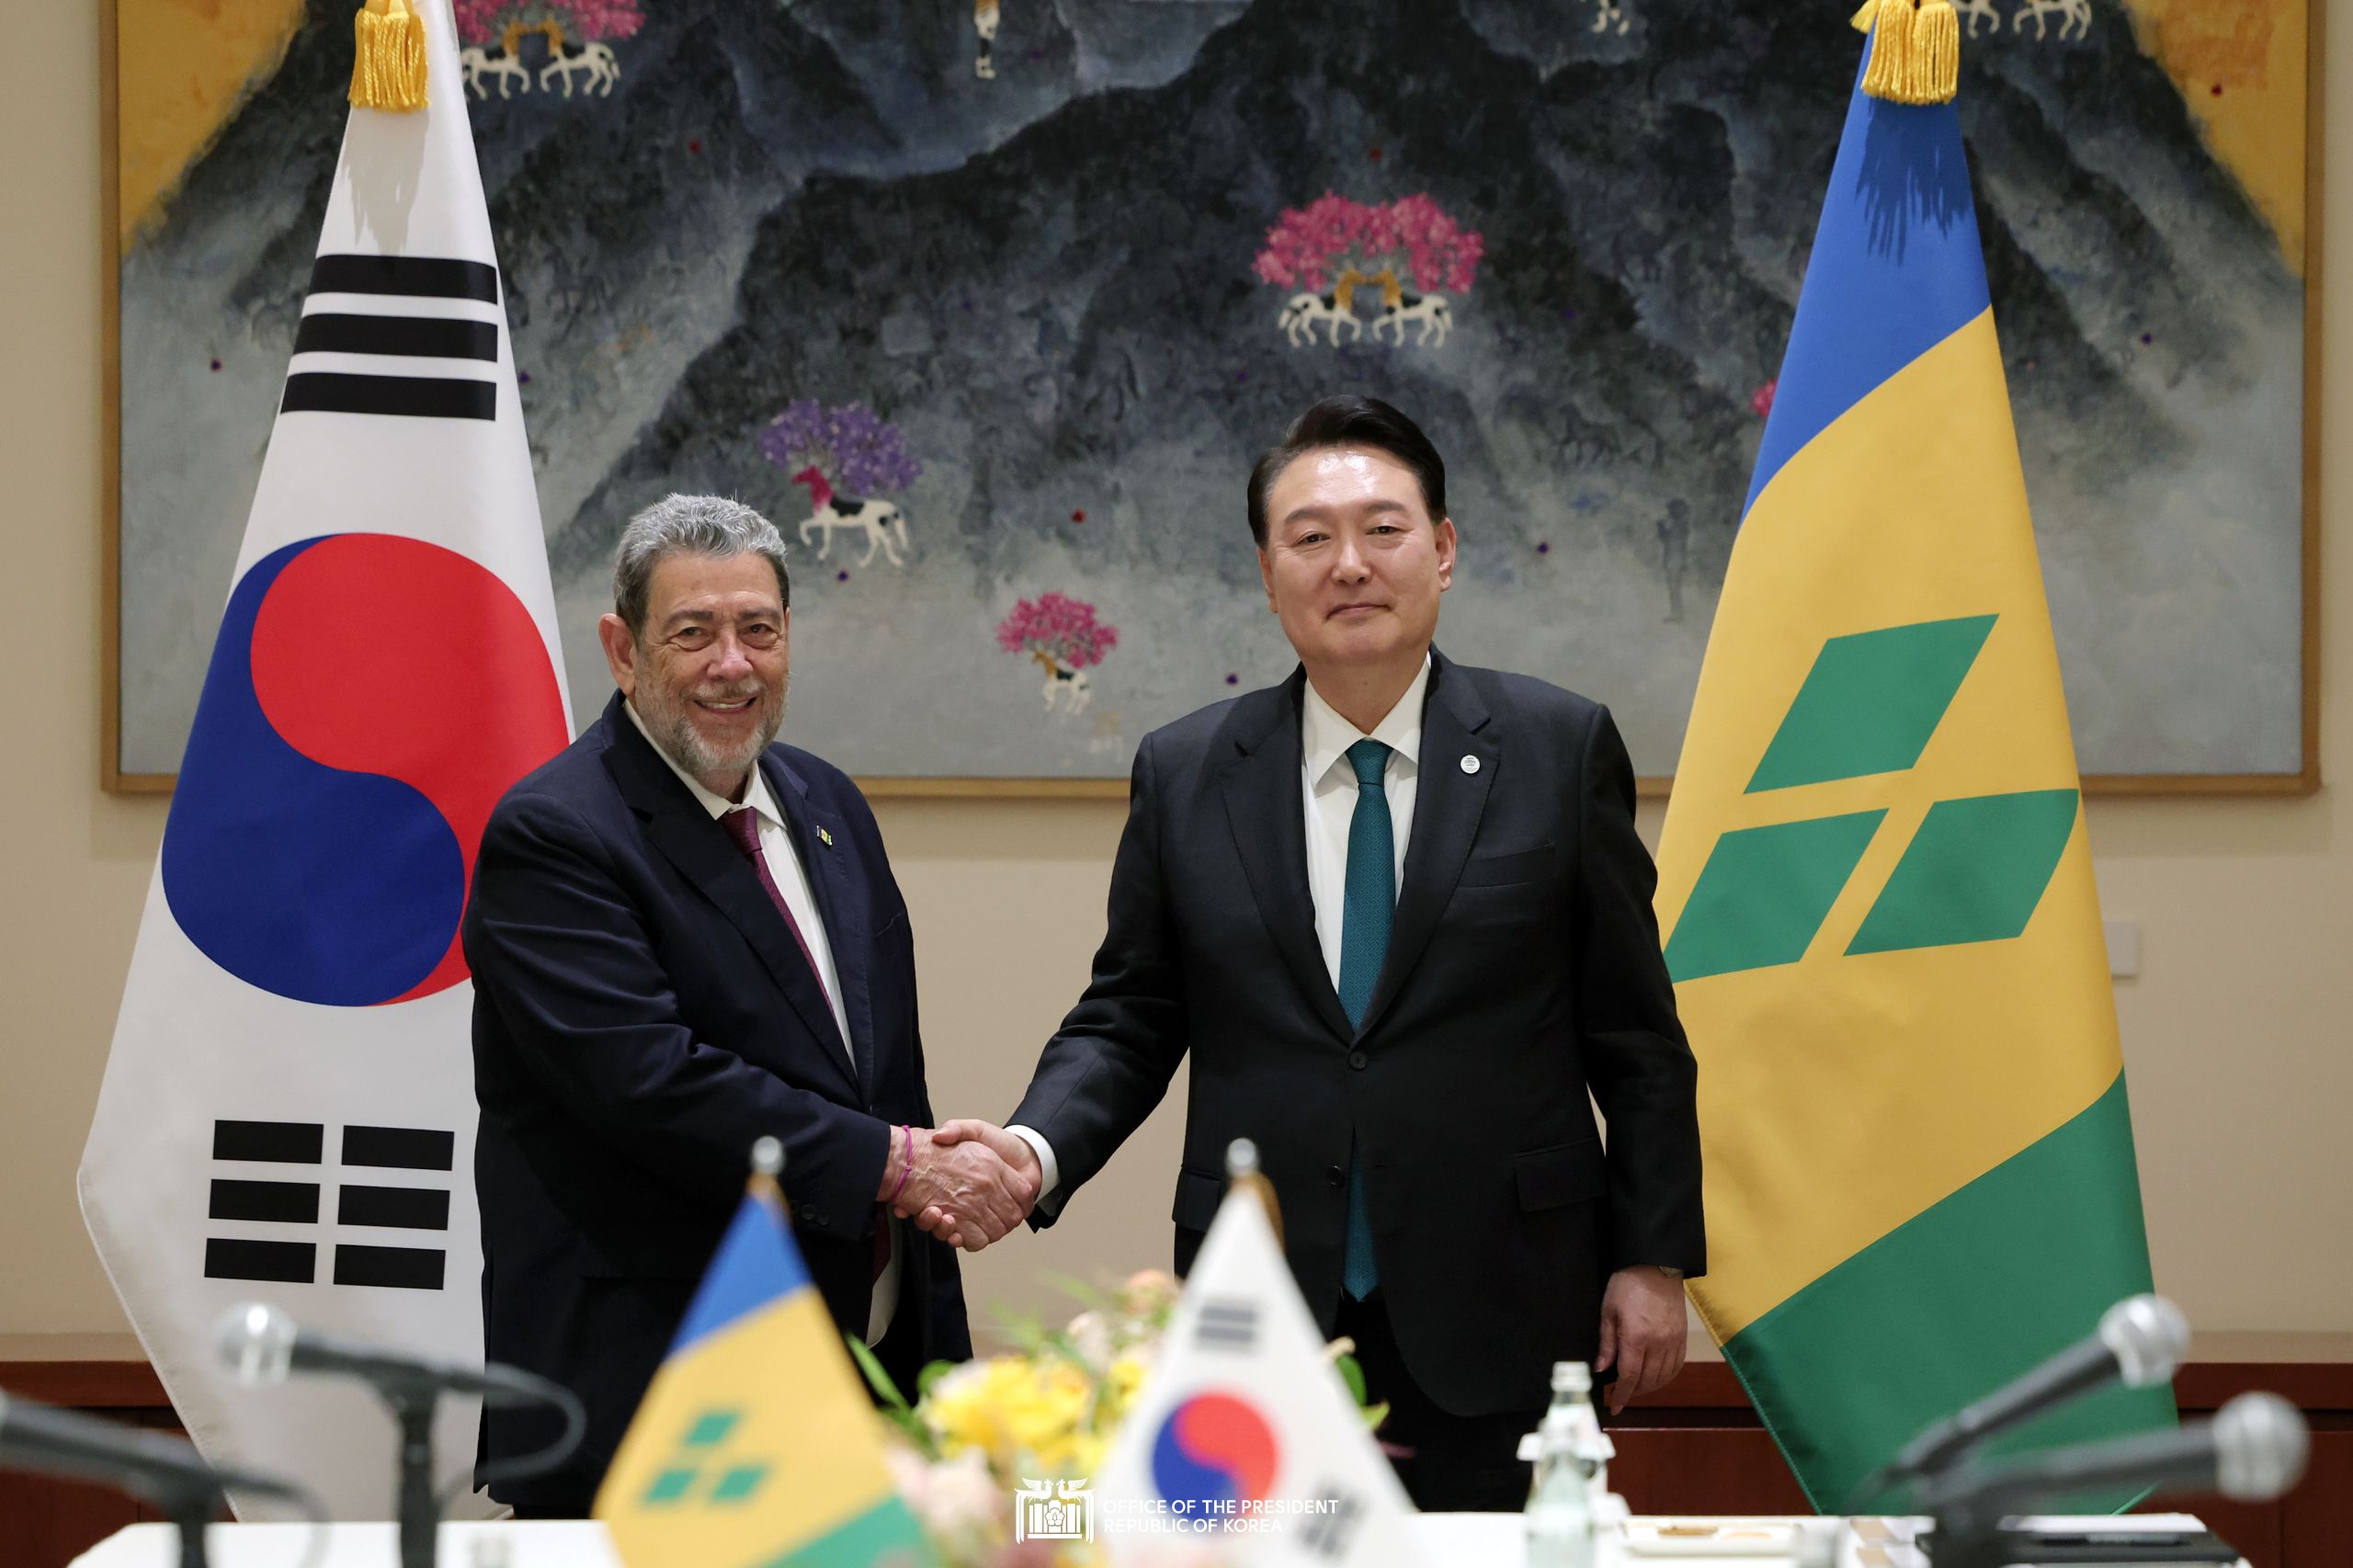 Korea-Saint Vincent and the Grenadines Summit in New York slide 1